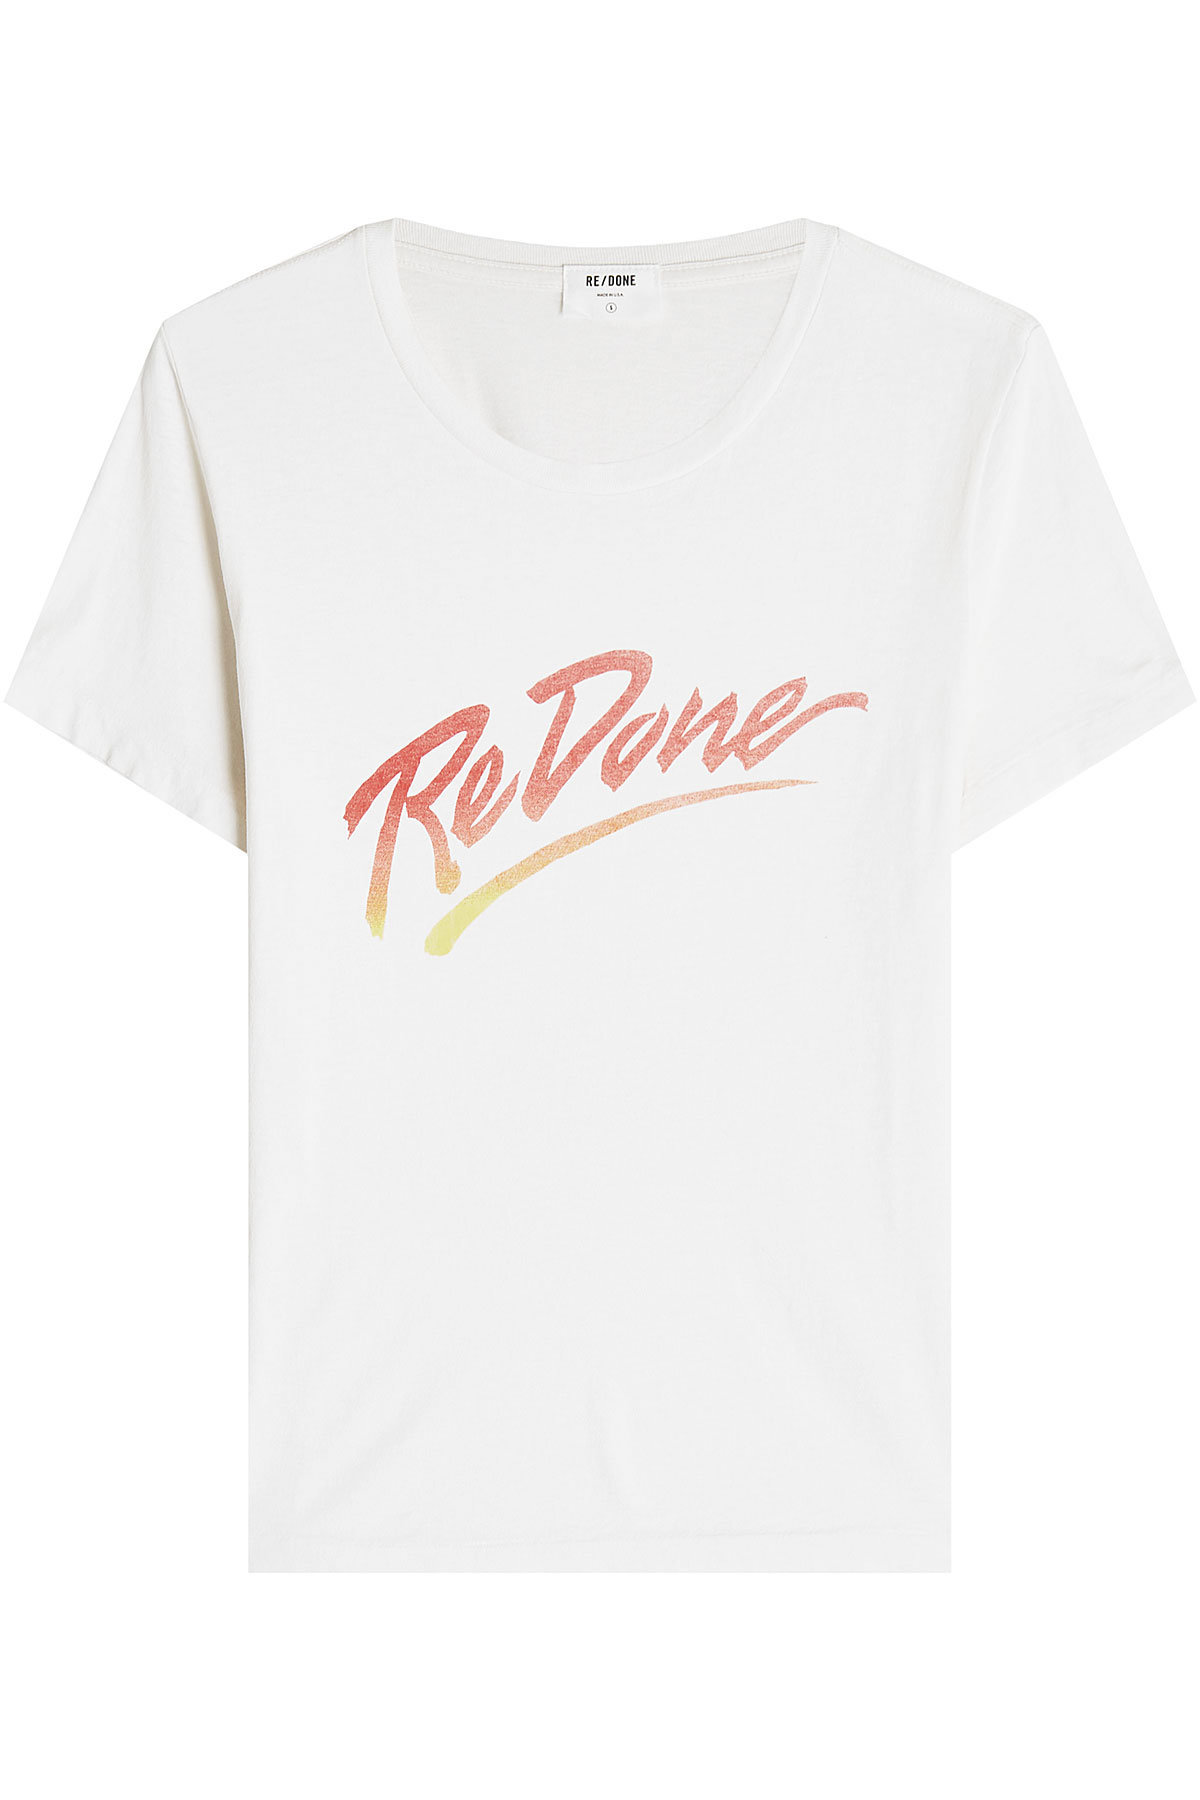 RE/DONE - The Classic Tee Printed Cotton T-Shirt